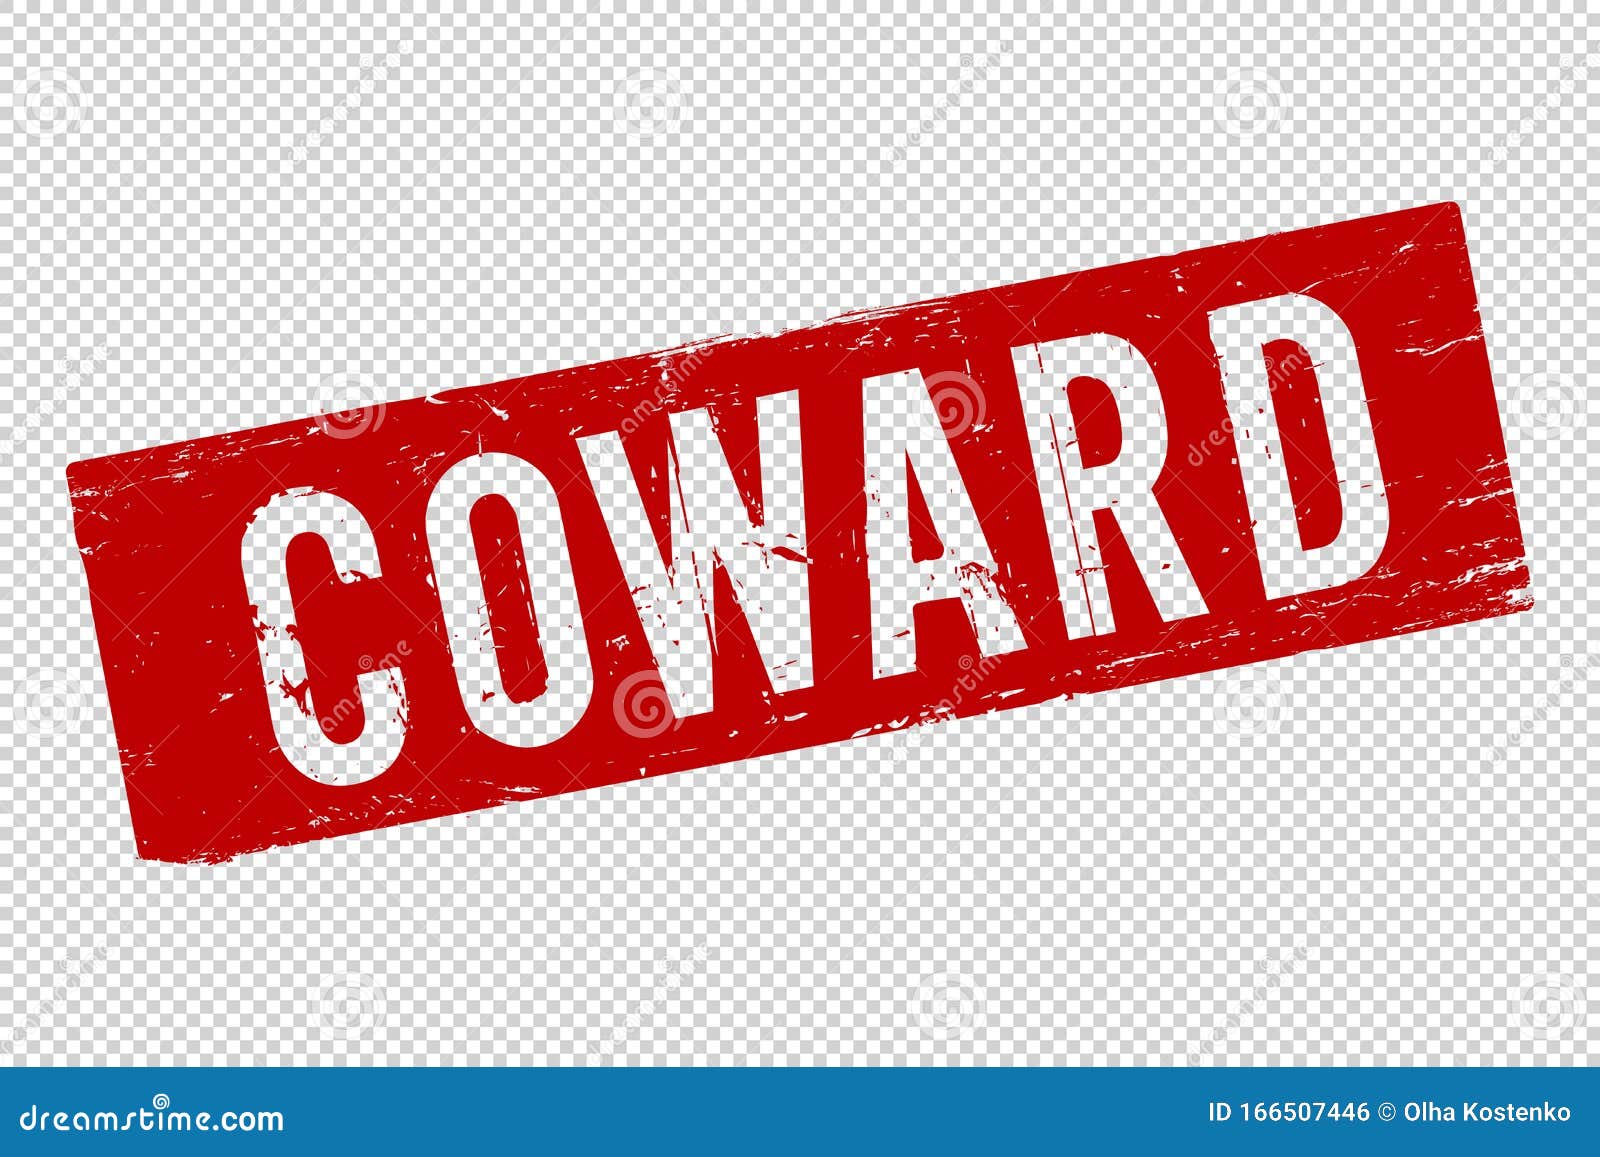 coward red square rubber stamp